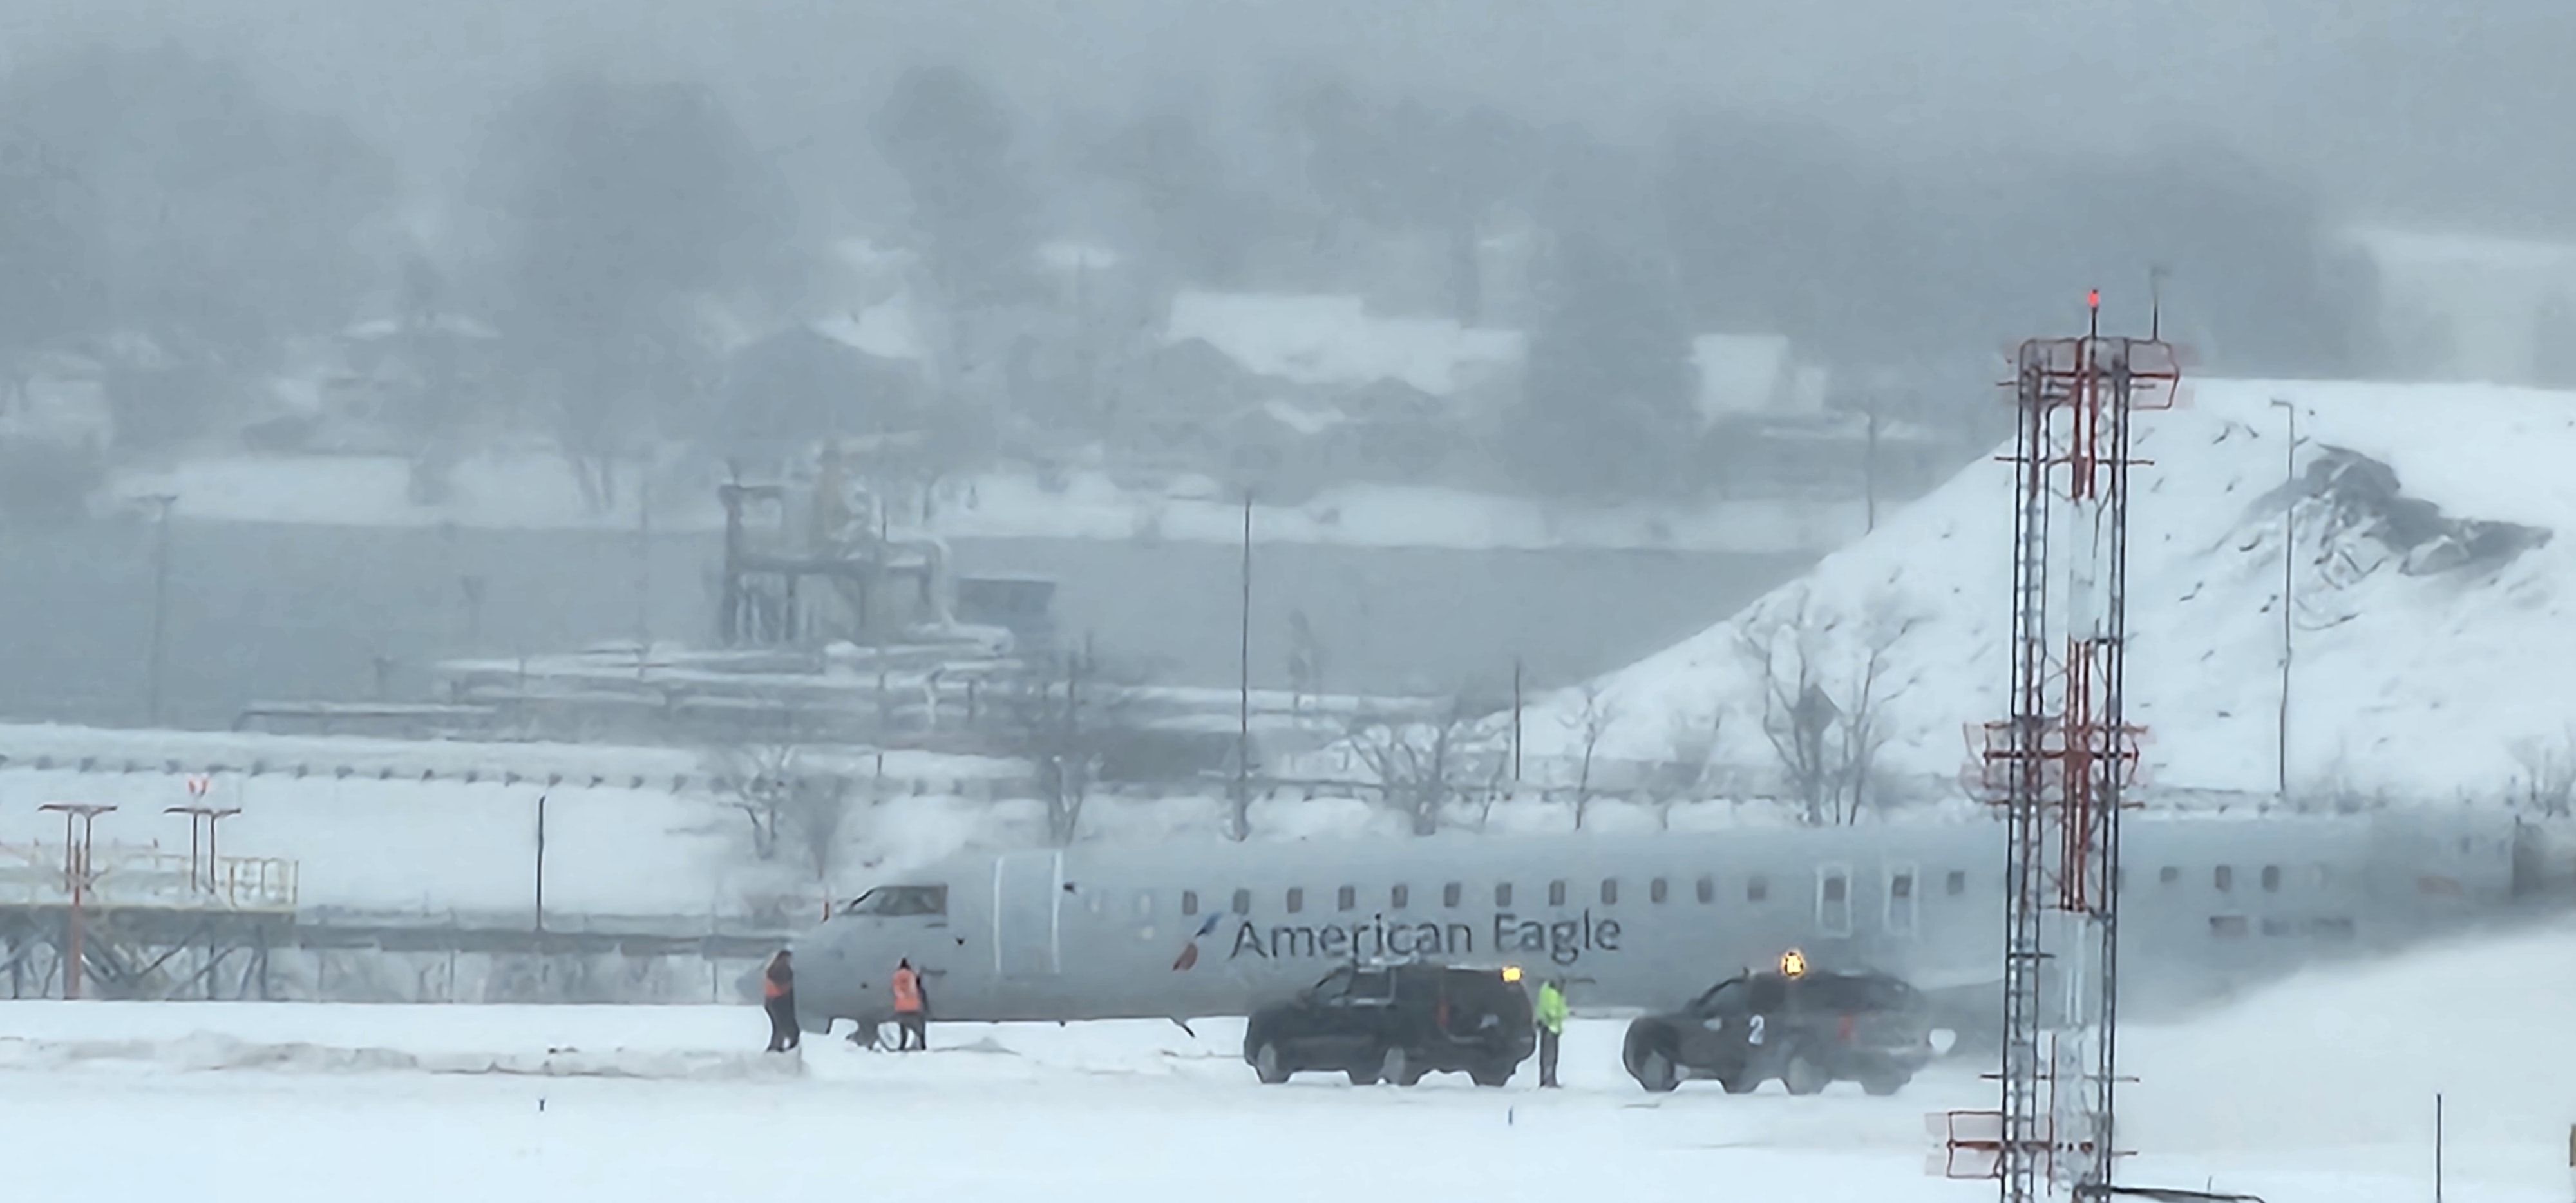 American Airlines Bombardier CRJ900 Slides Off Runway In Portland American Airlines Bombardier CRJ900 Slides Off Runway In Portland, Maine